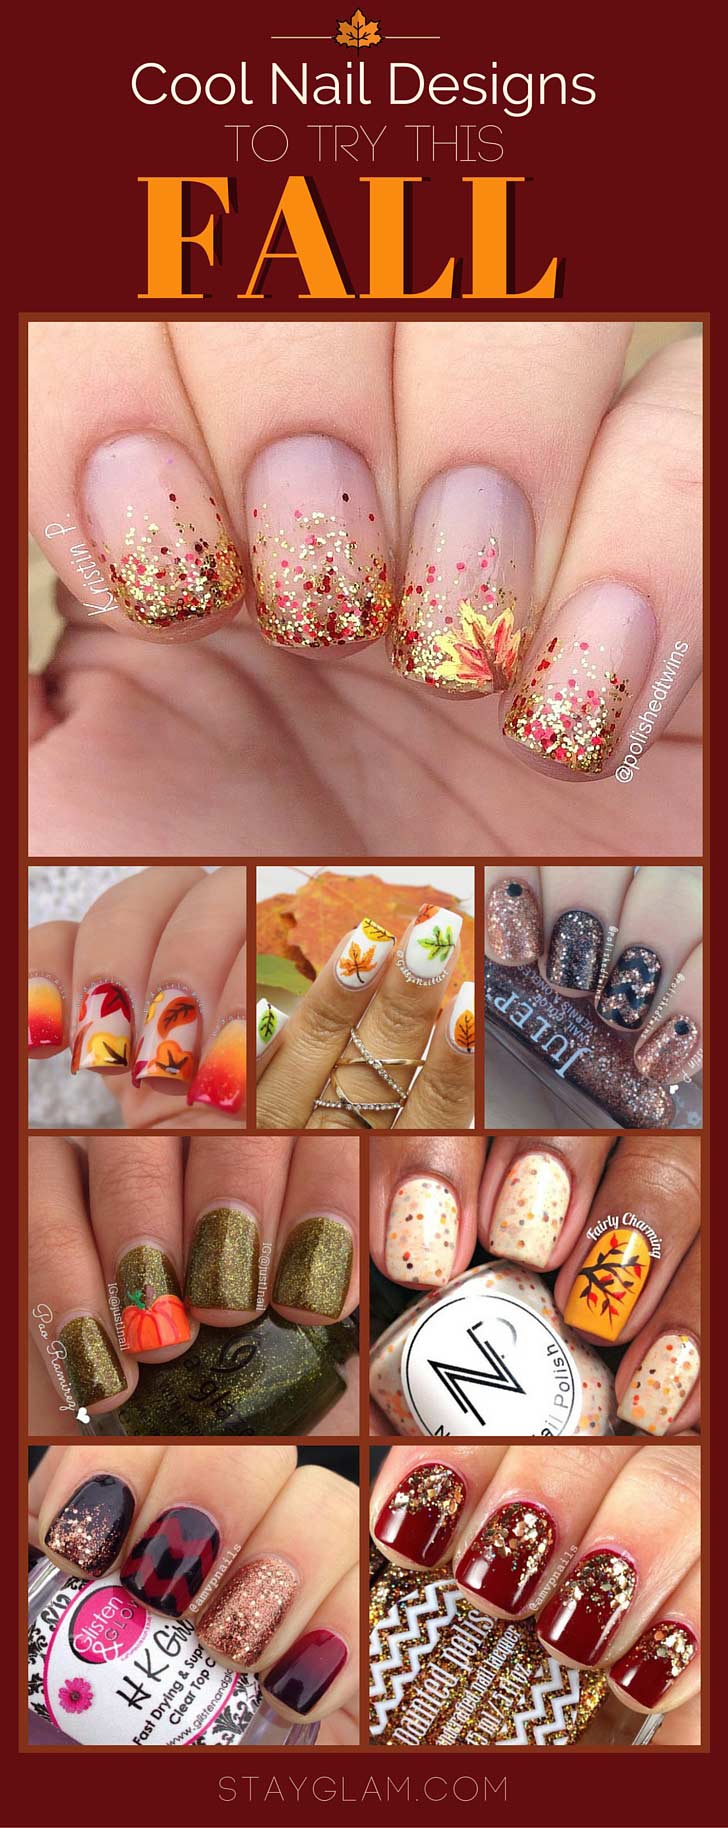  Cool Nail Designs for Fall 